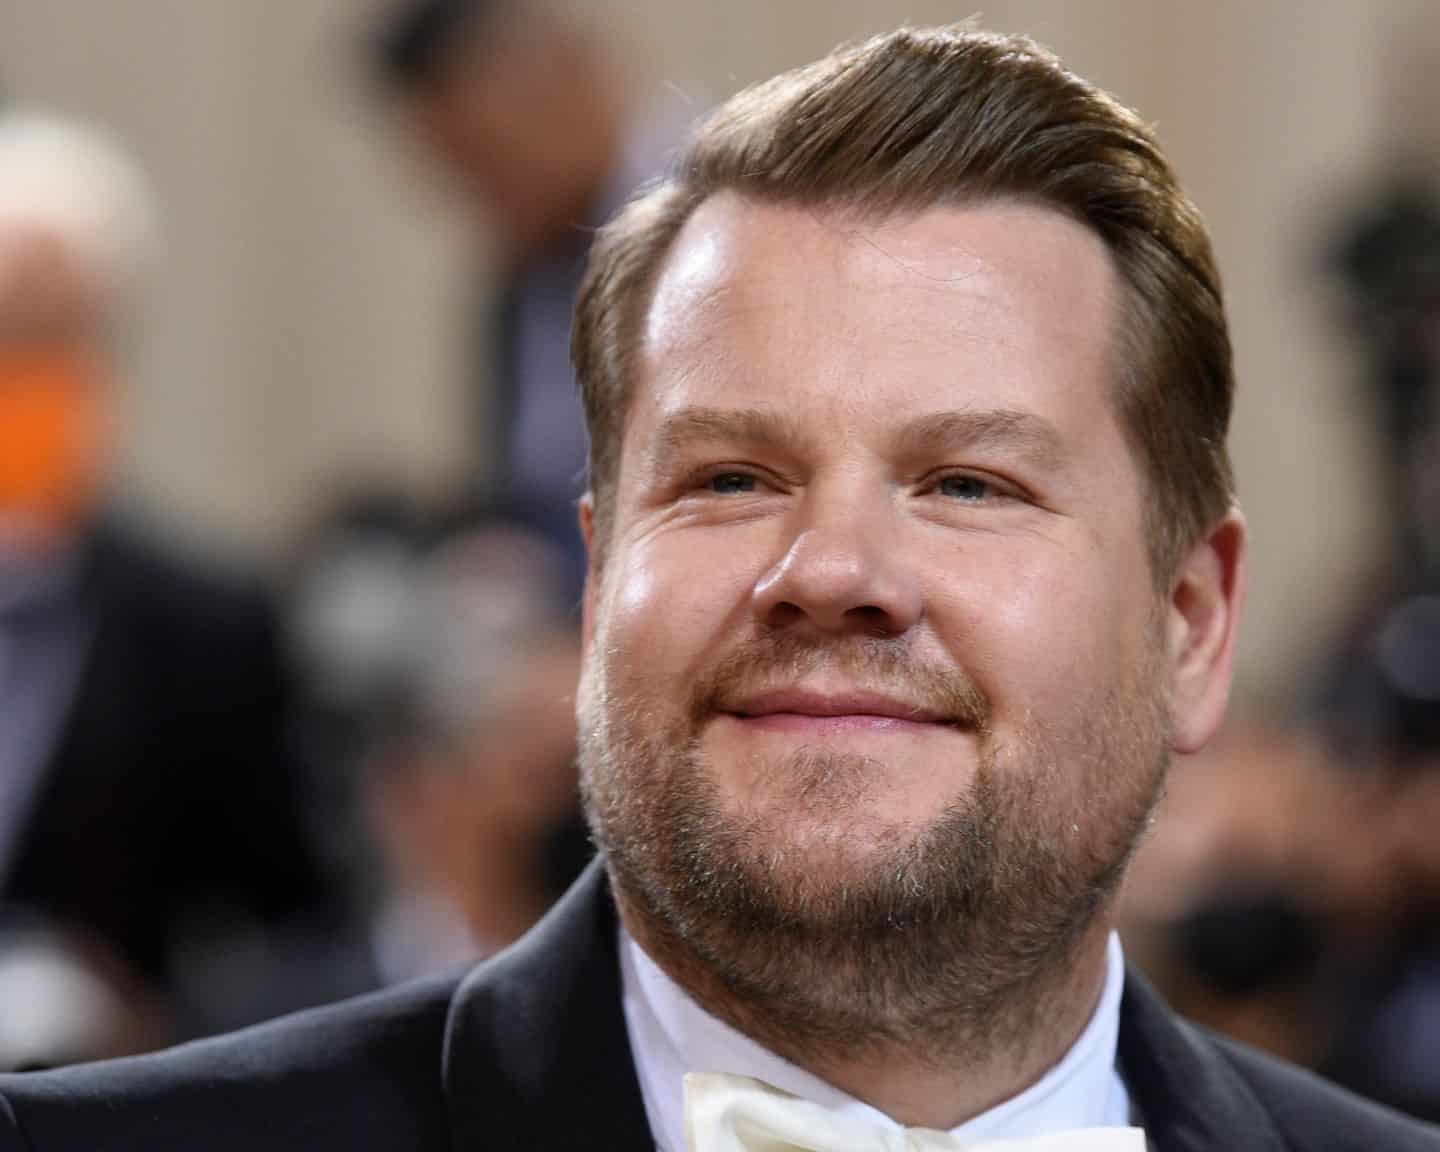 James Corden faced severe criticism, with the owner of Balthazar restaurant in New York City, Keith McNally